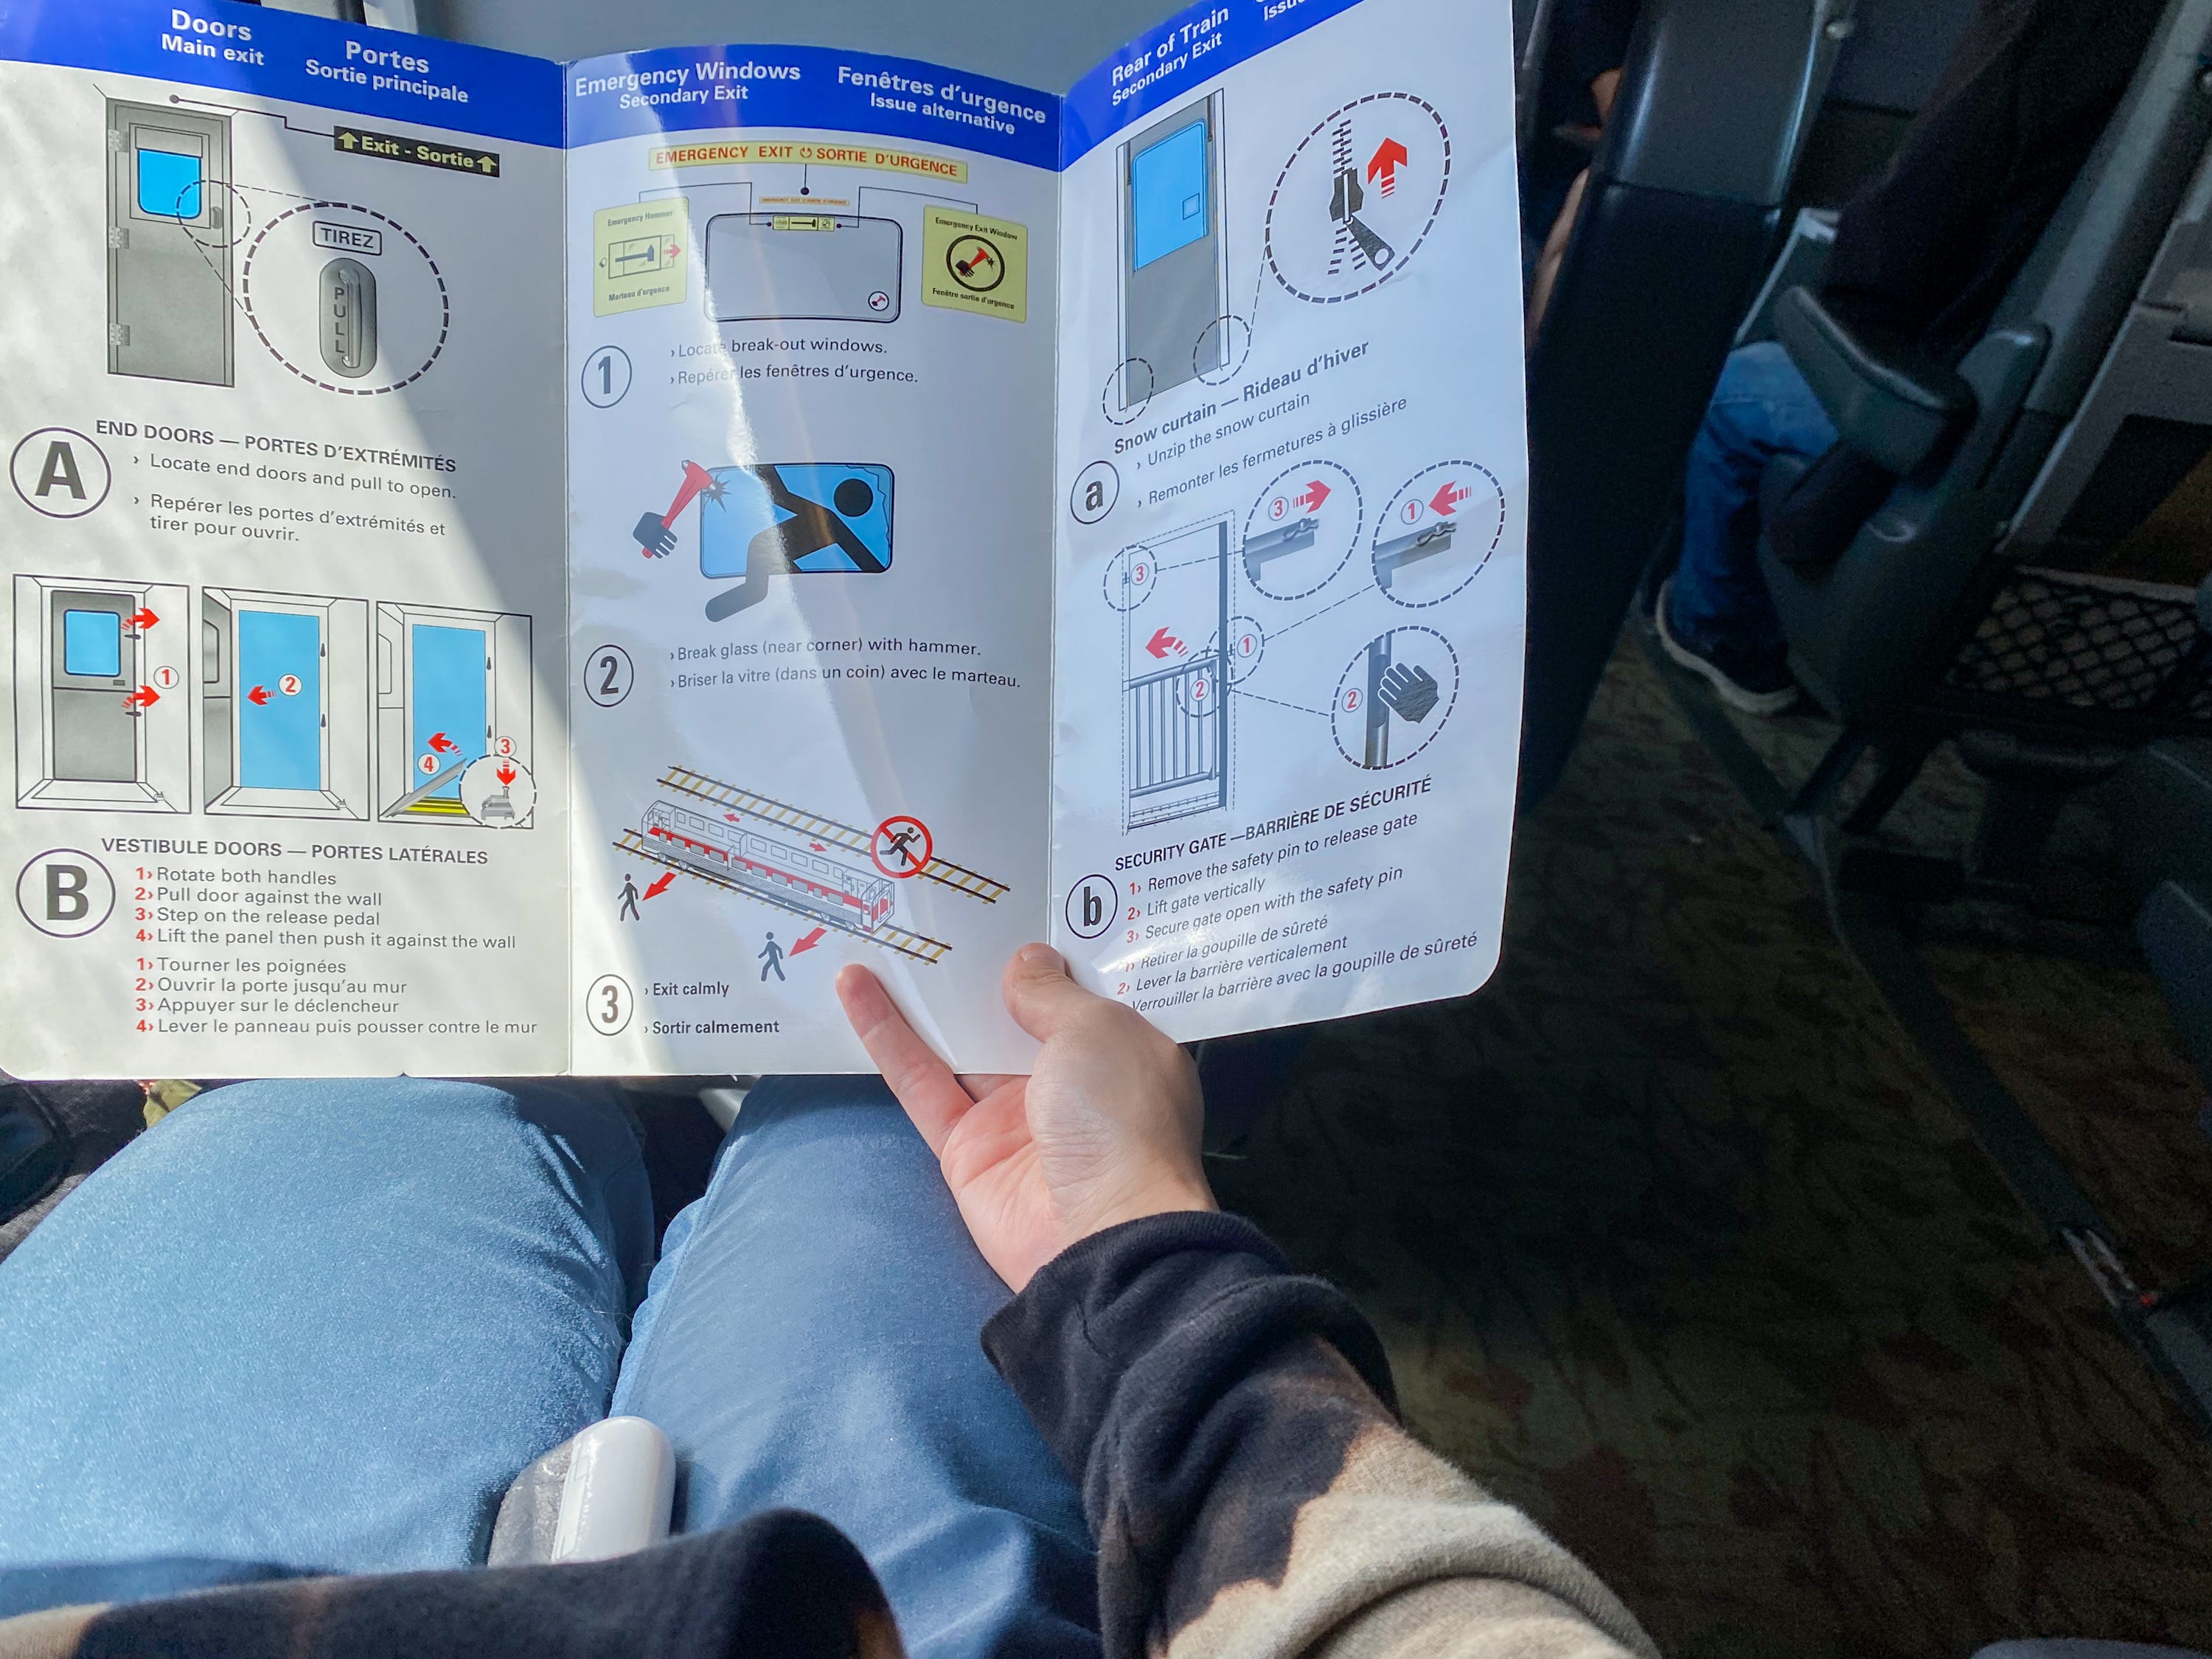 I also noticed that, unlike on my rides with Amtrak, Via Rail's seat back compartments held a safety pamphlet with directions for what to do in an emergency situation. I found this comforting.